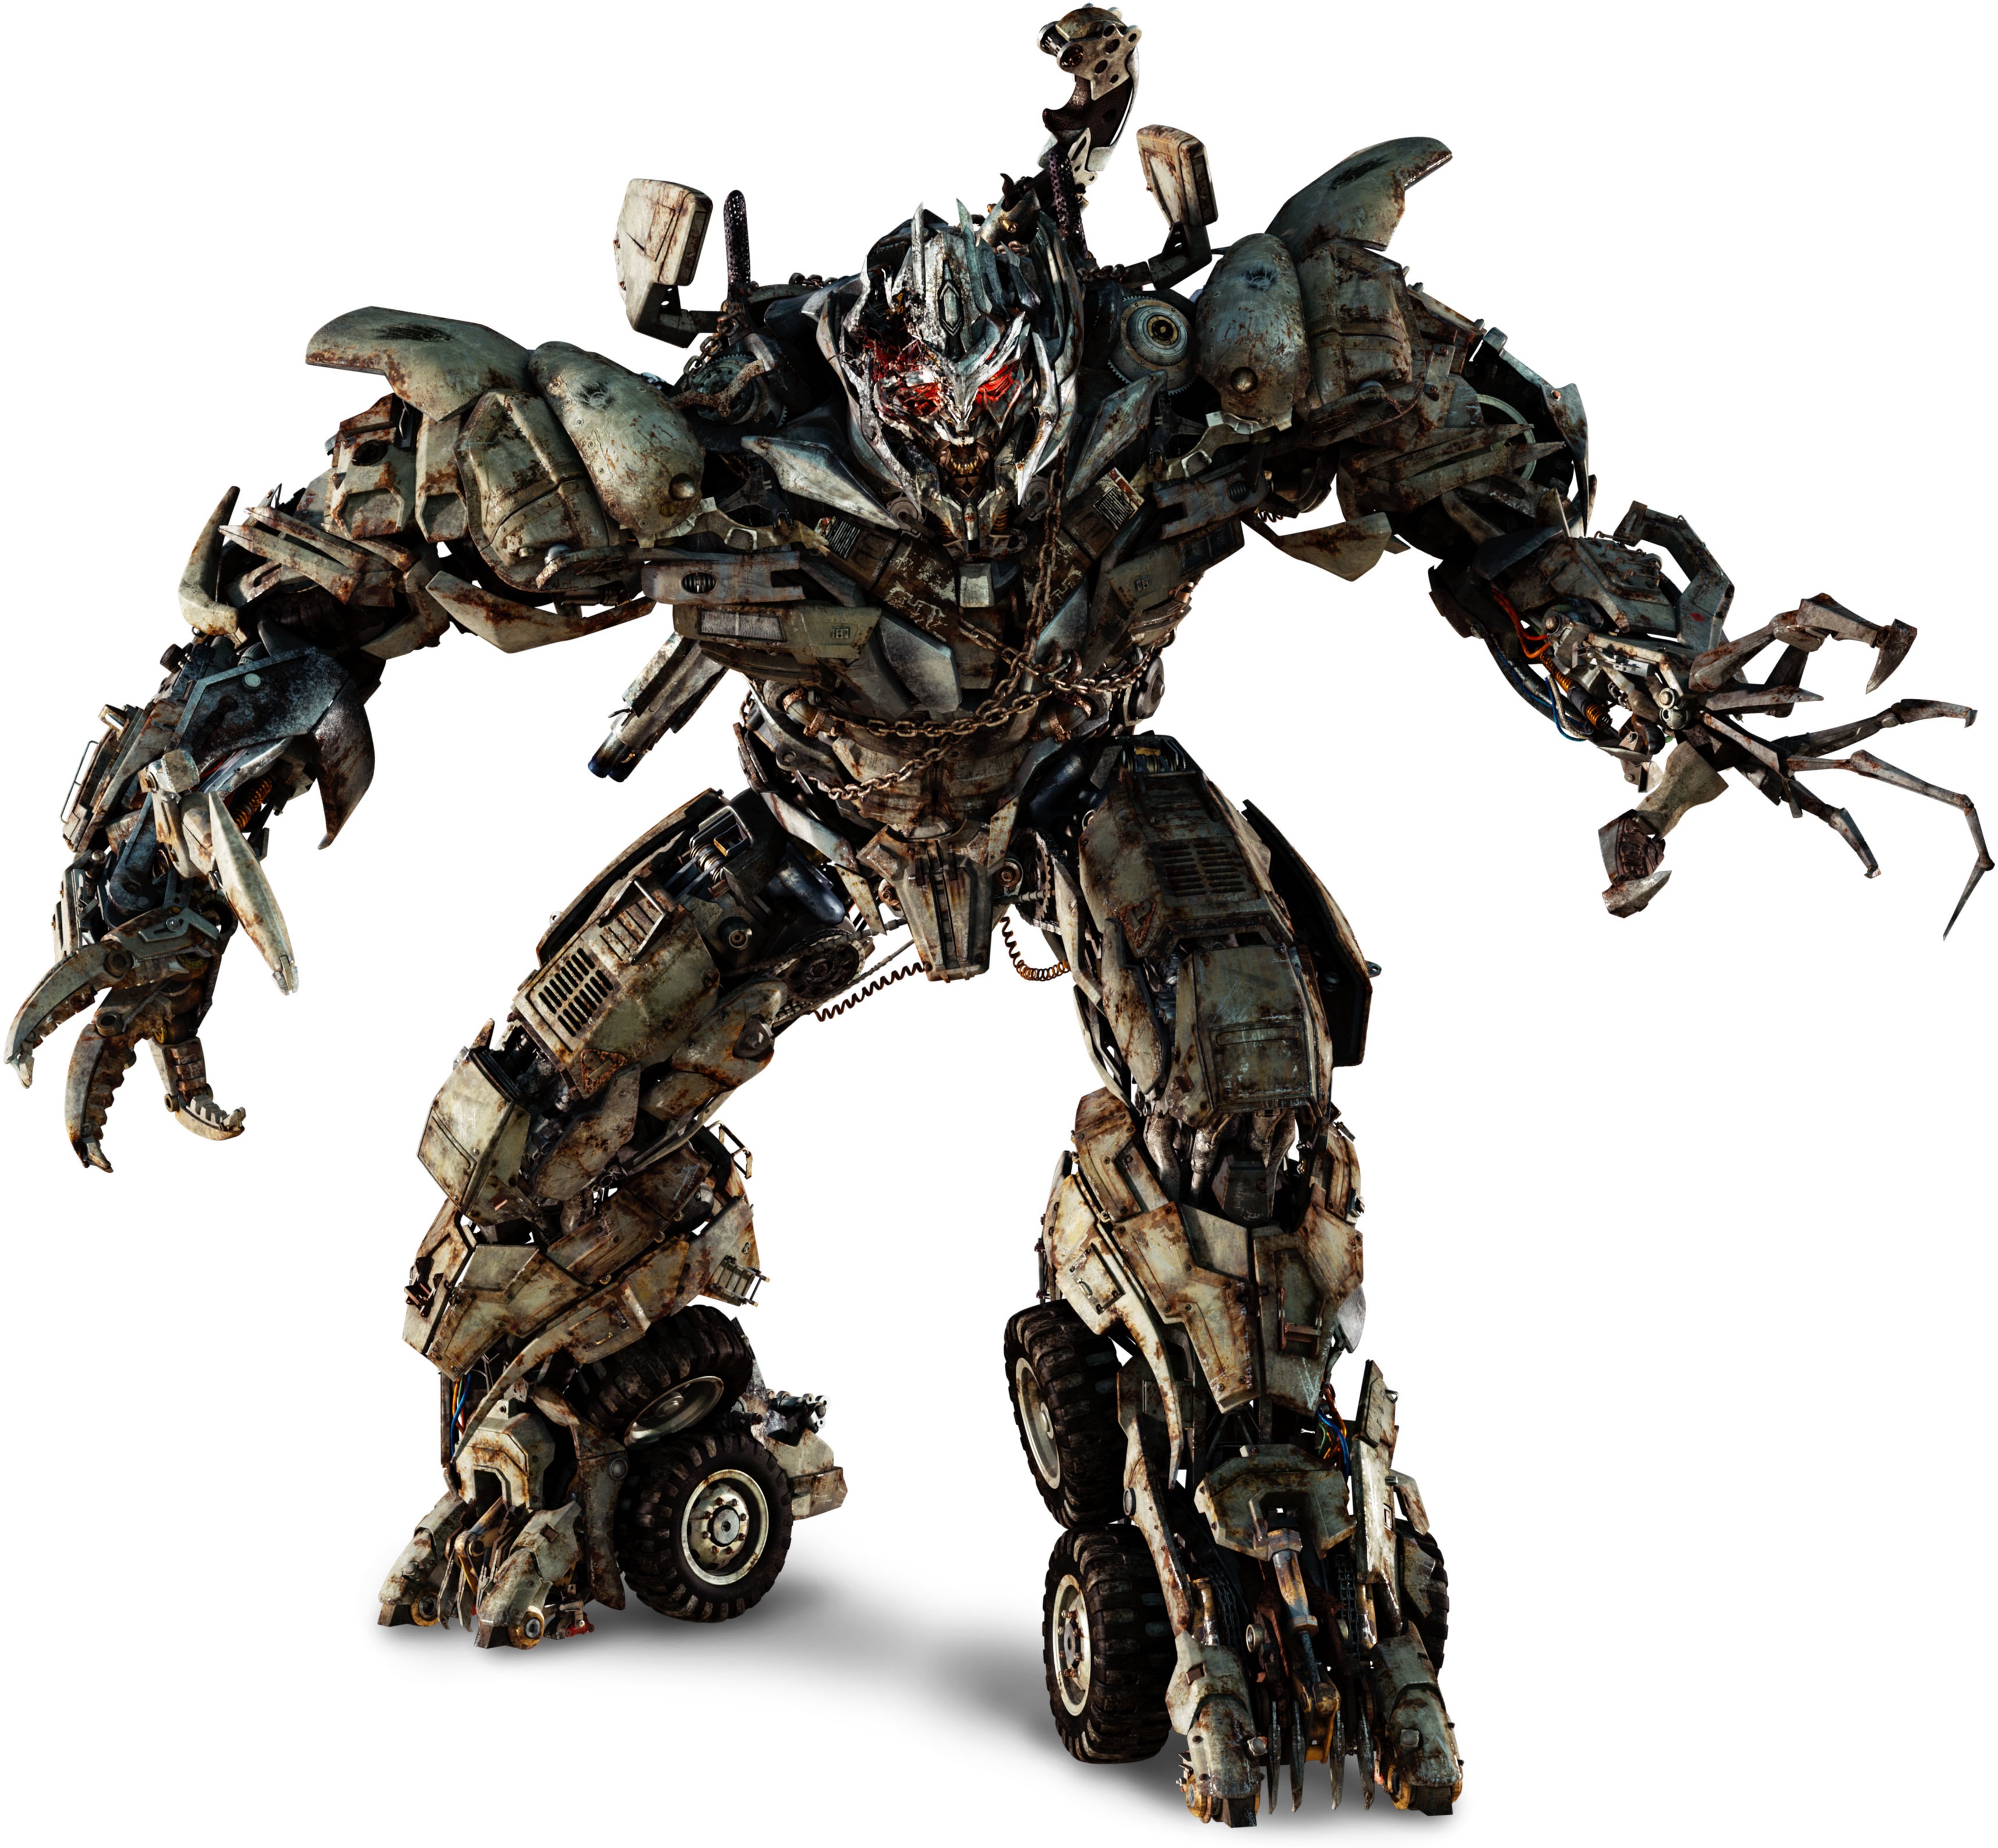 Why Transformers Recast Megatron After 3 Michael Bay Movies